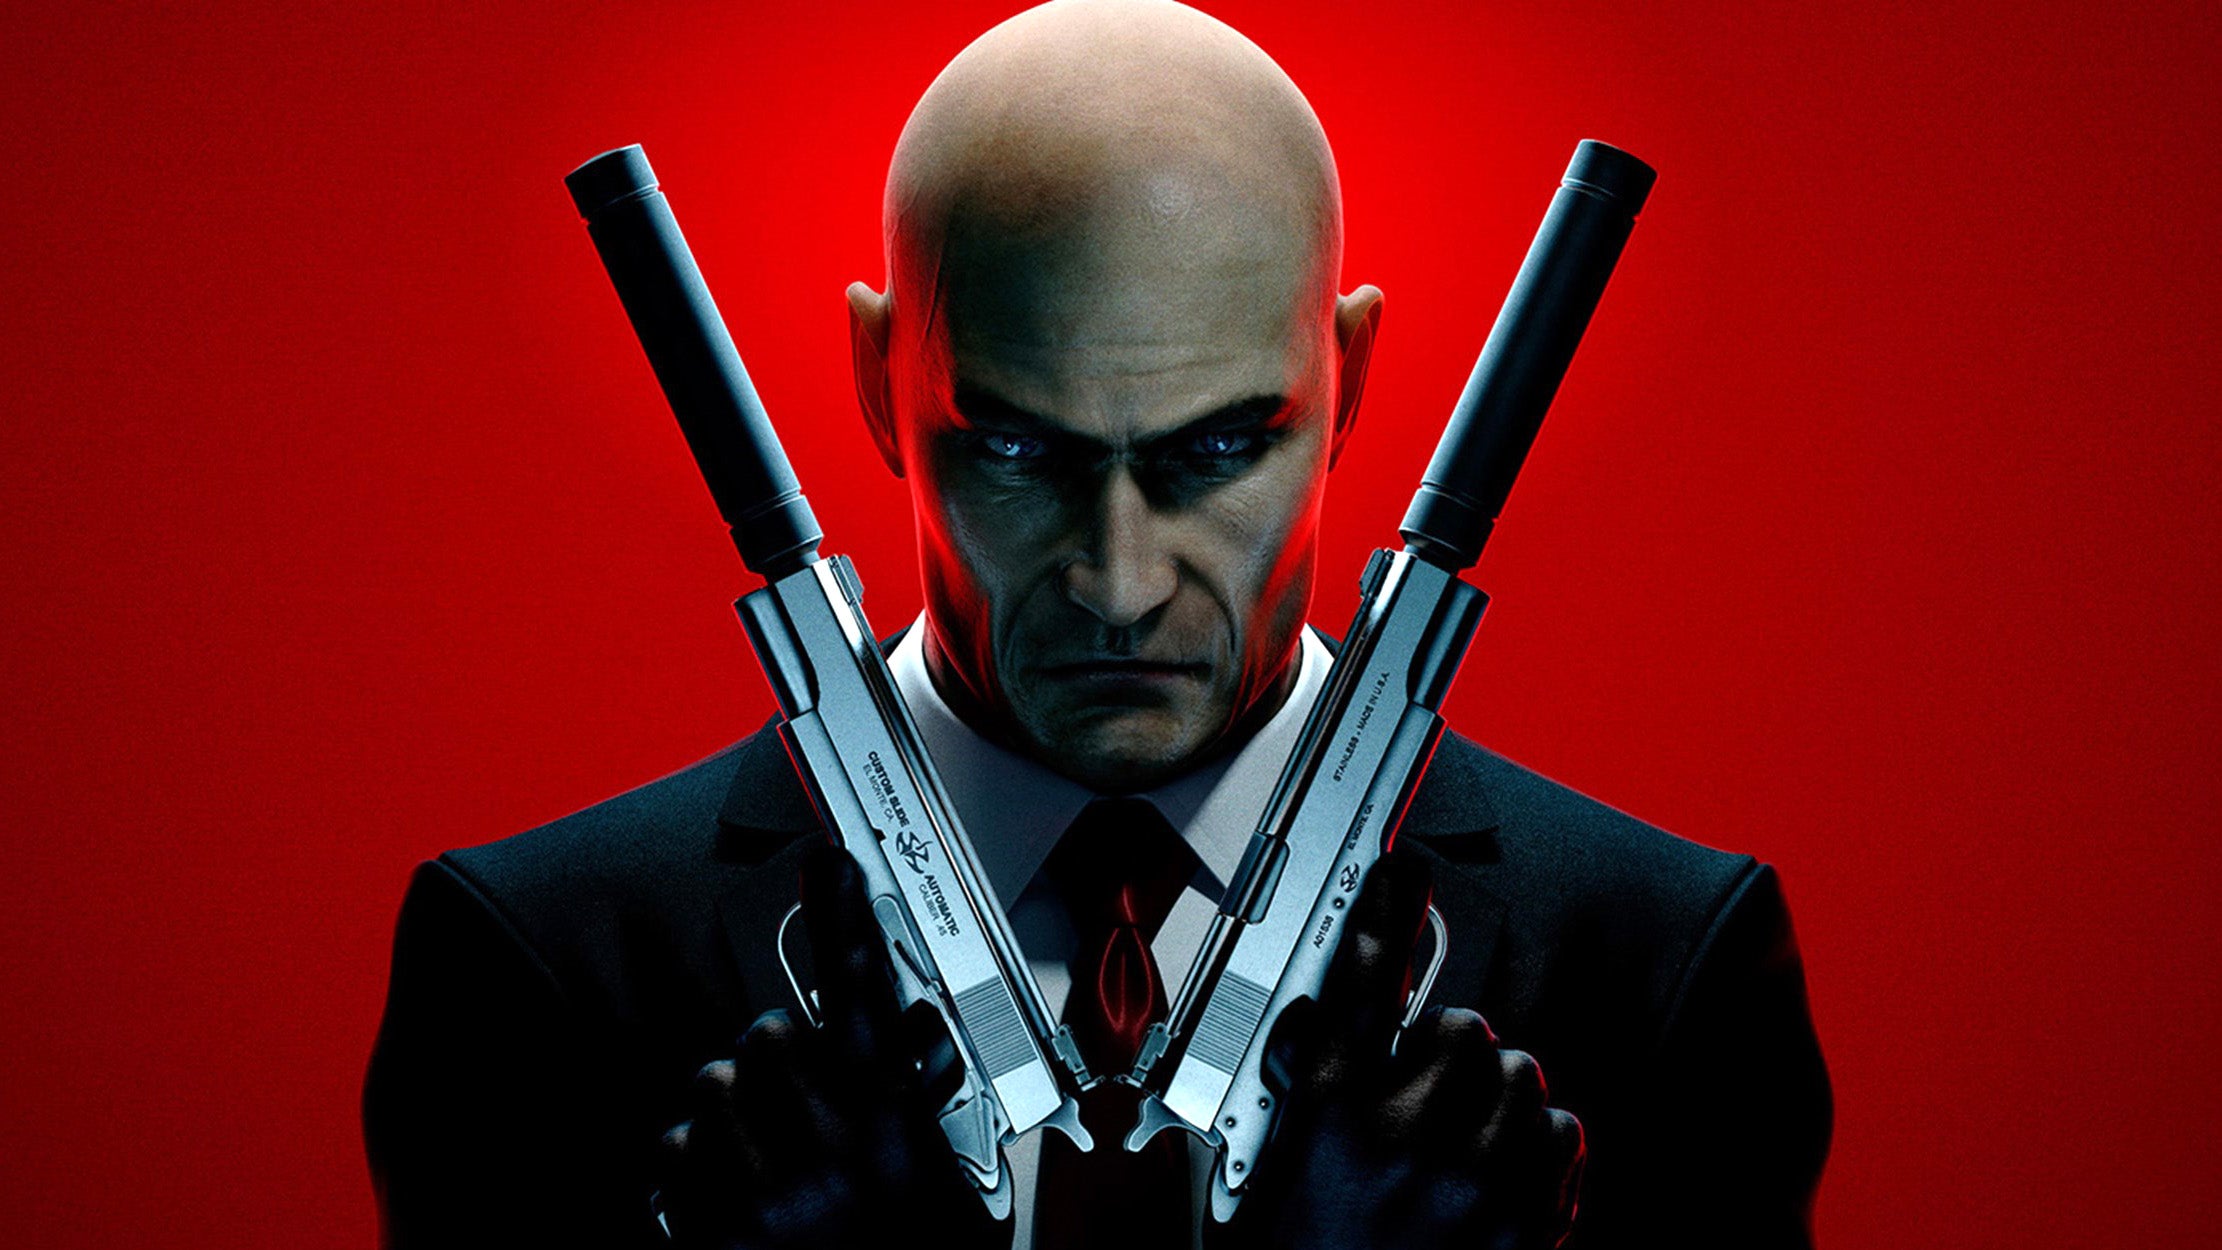 Agent 47 from Hitman, close-up, arms pressed against his chest and holding two guns, with silences framing either side of his sinister face. The background is blood red.